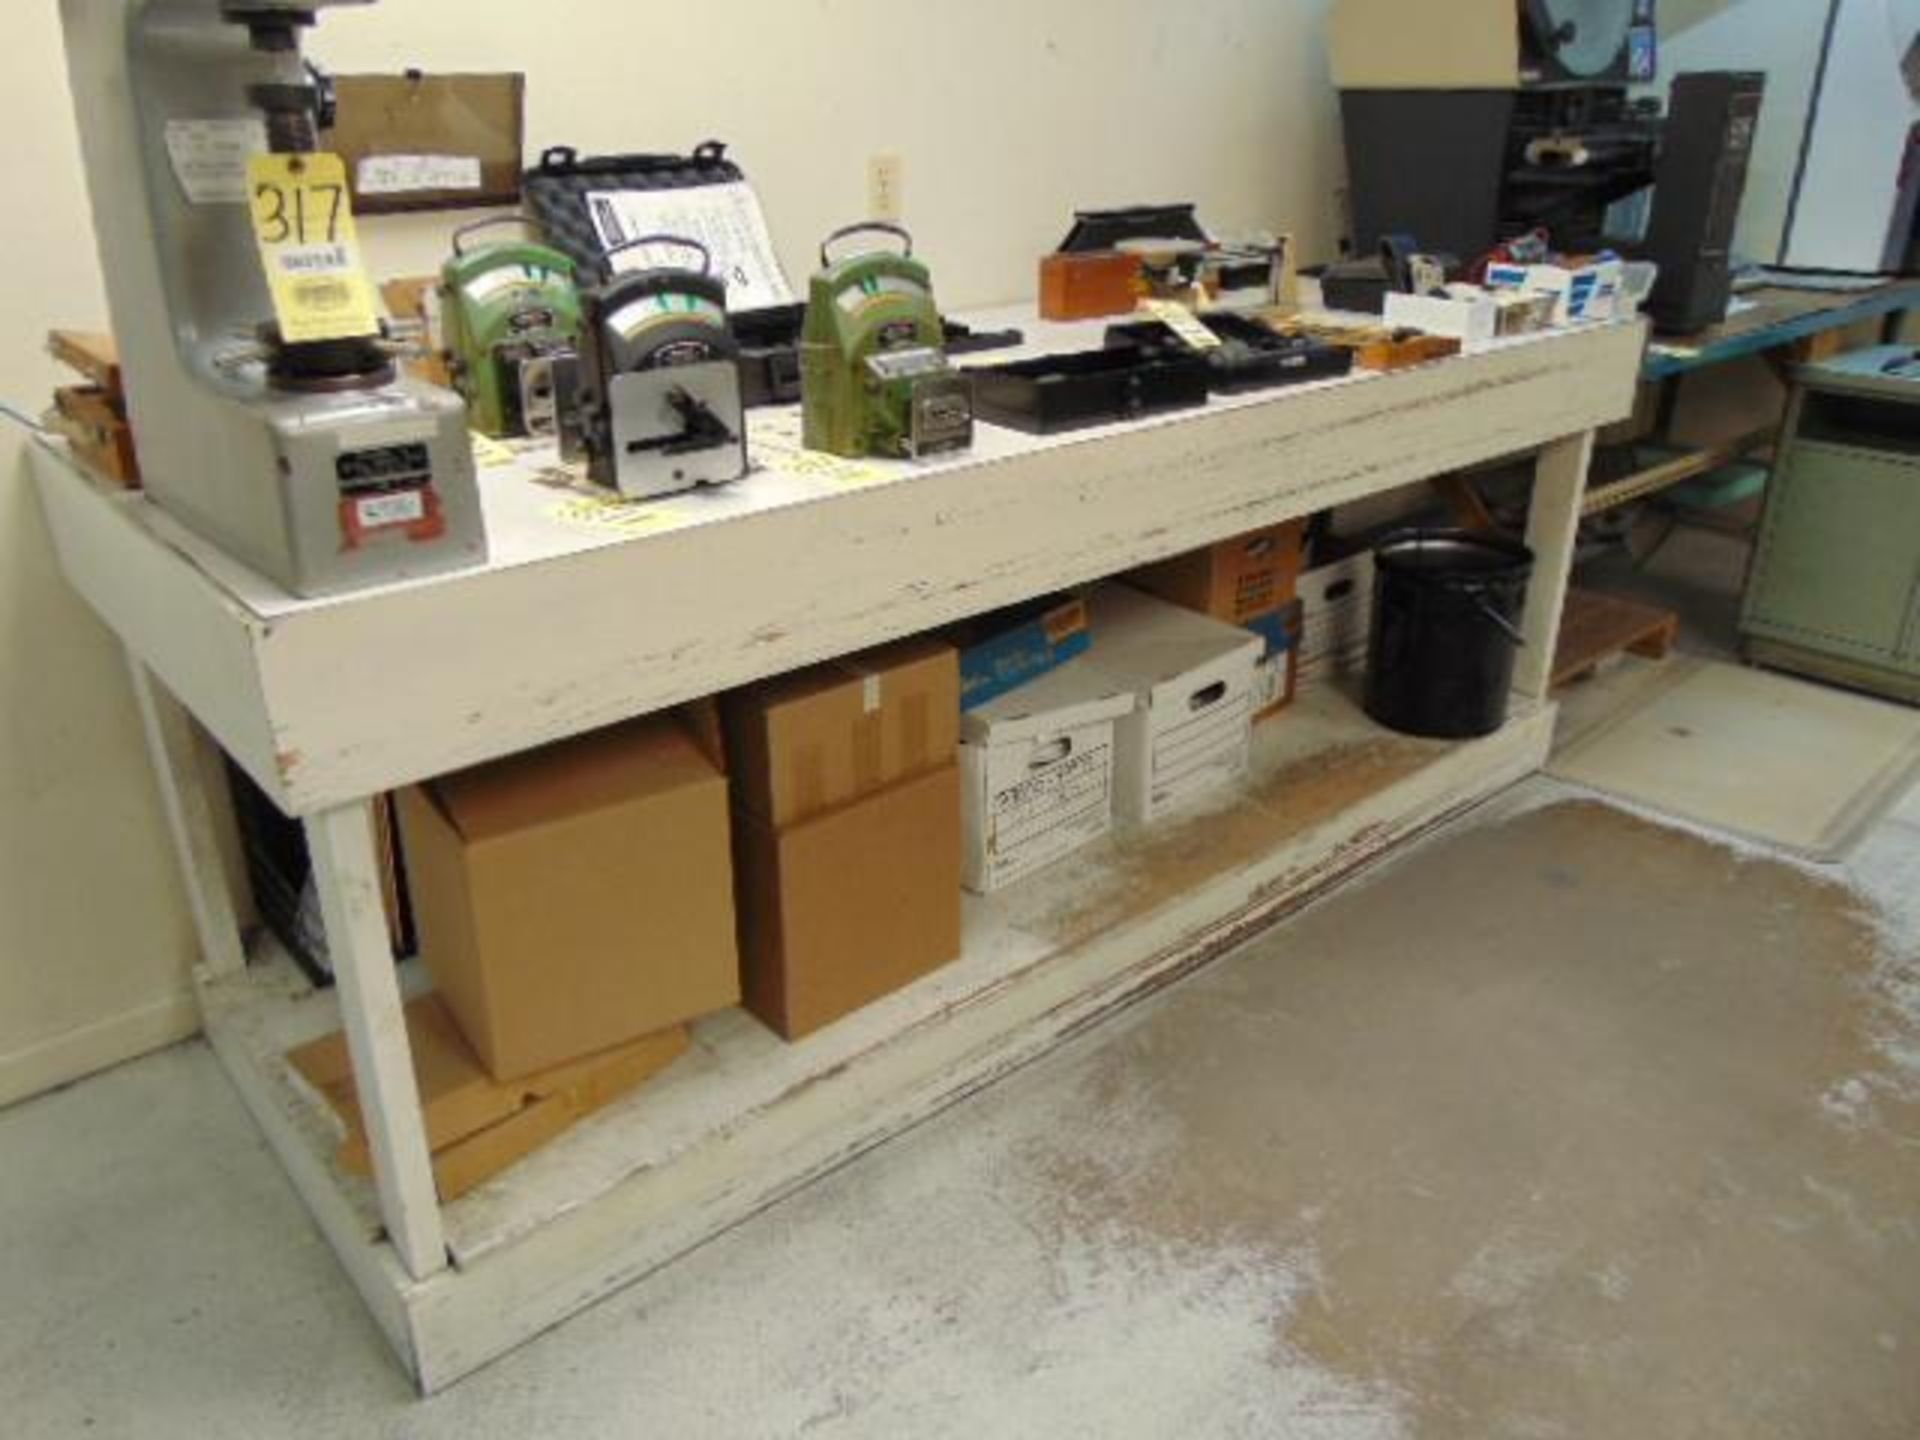 LOT OF STEEL WORK BENCH & WOOD TABLE (Note: cannot be removed until empty)